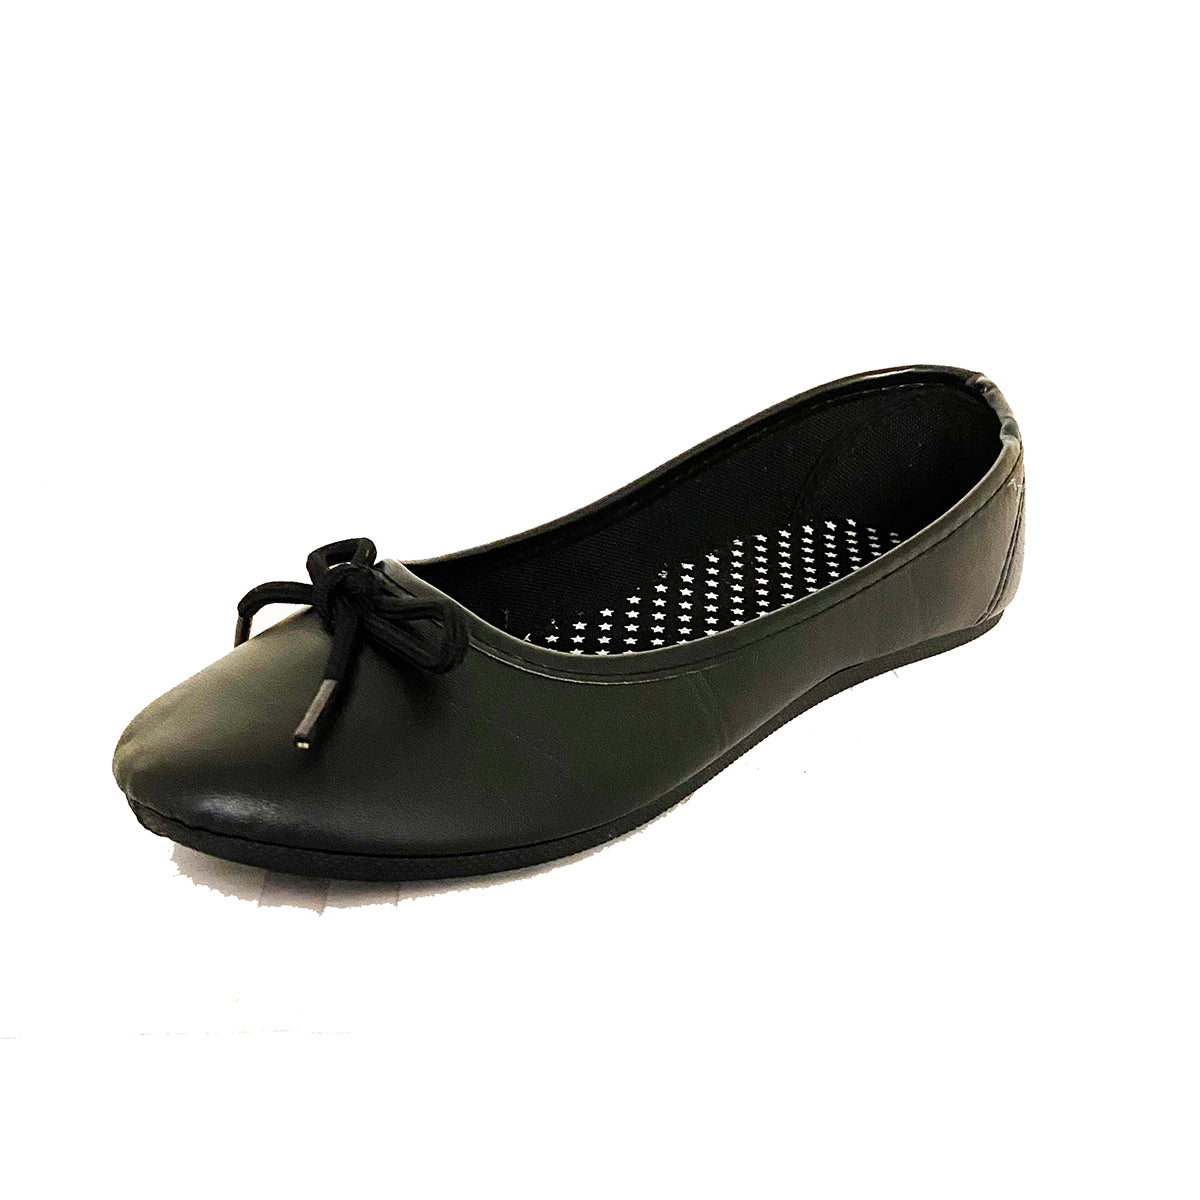 Black soft faux leather flat shoes / pumps with small bow